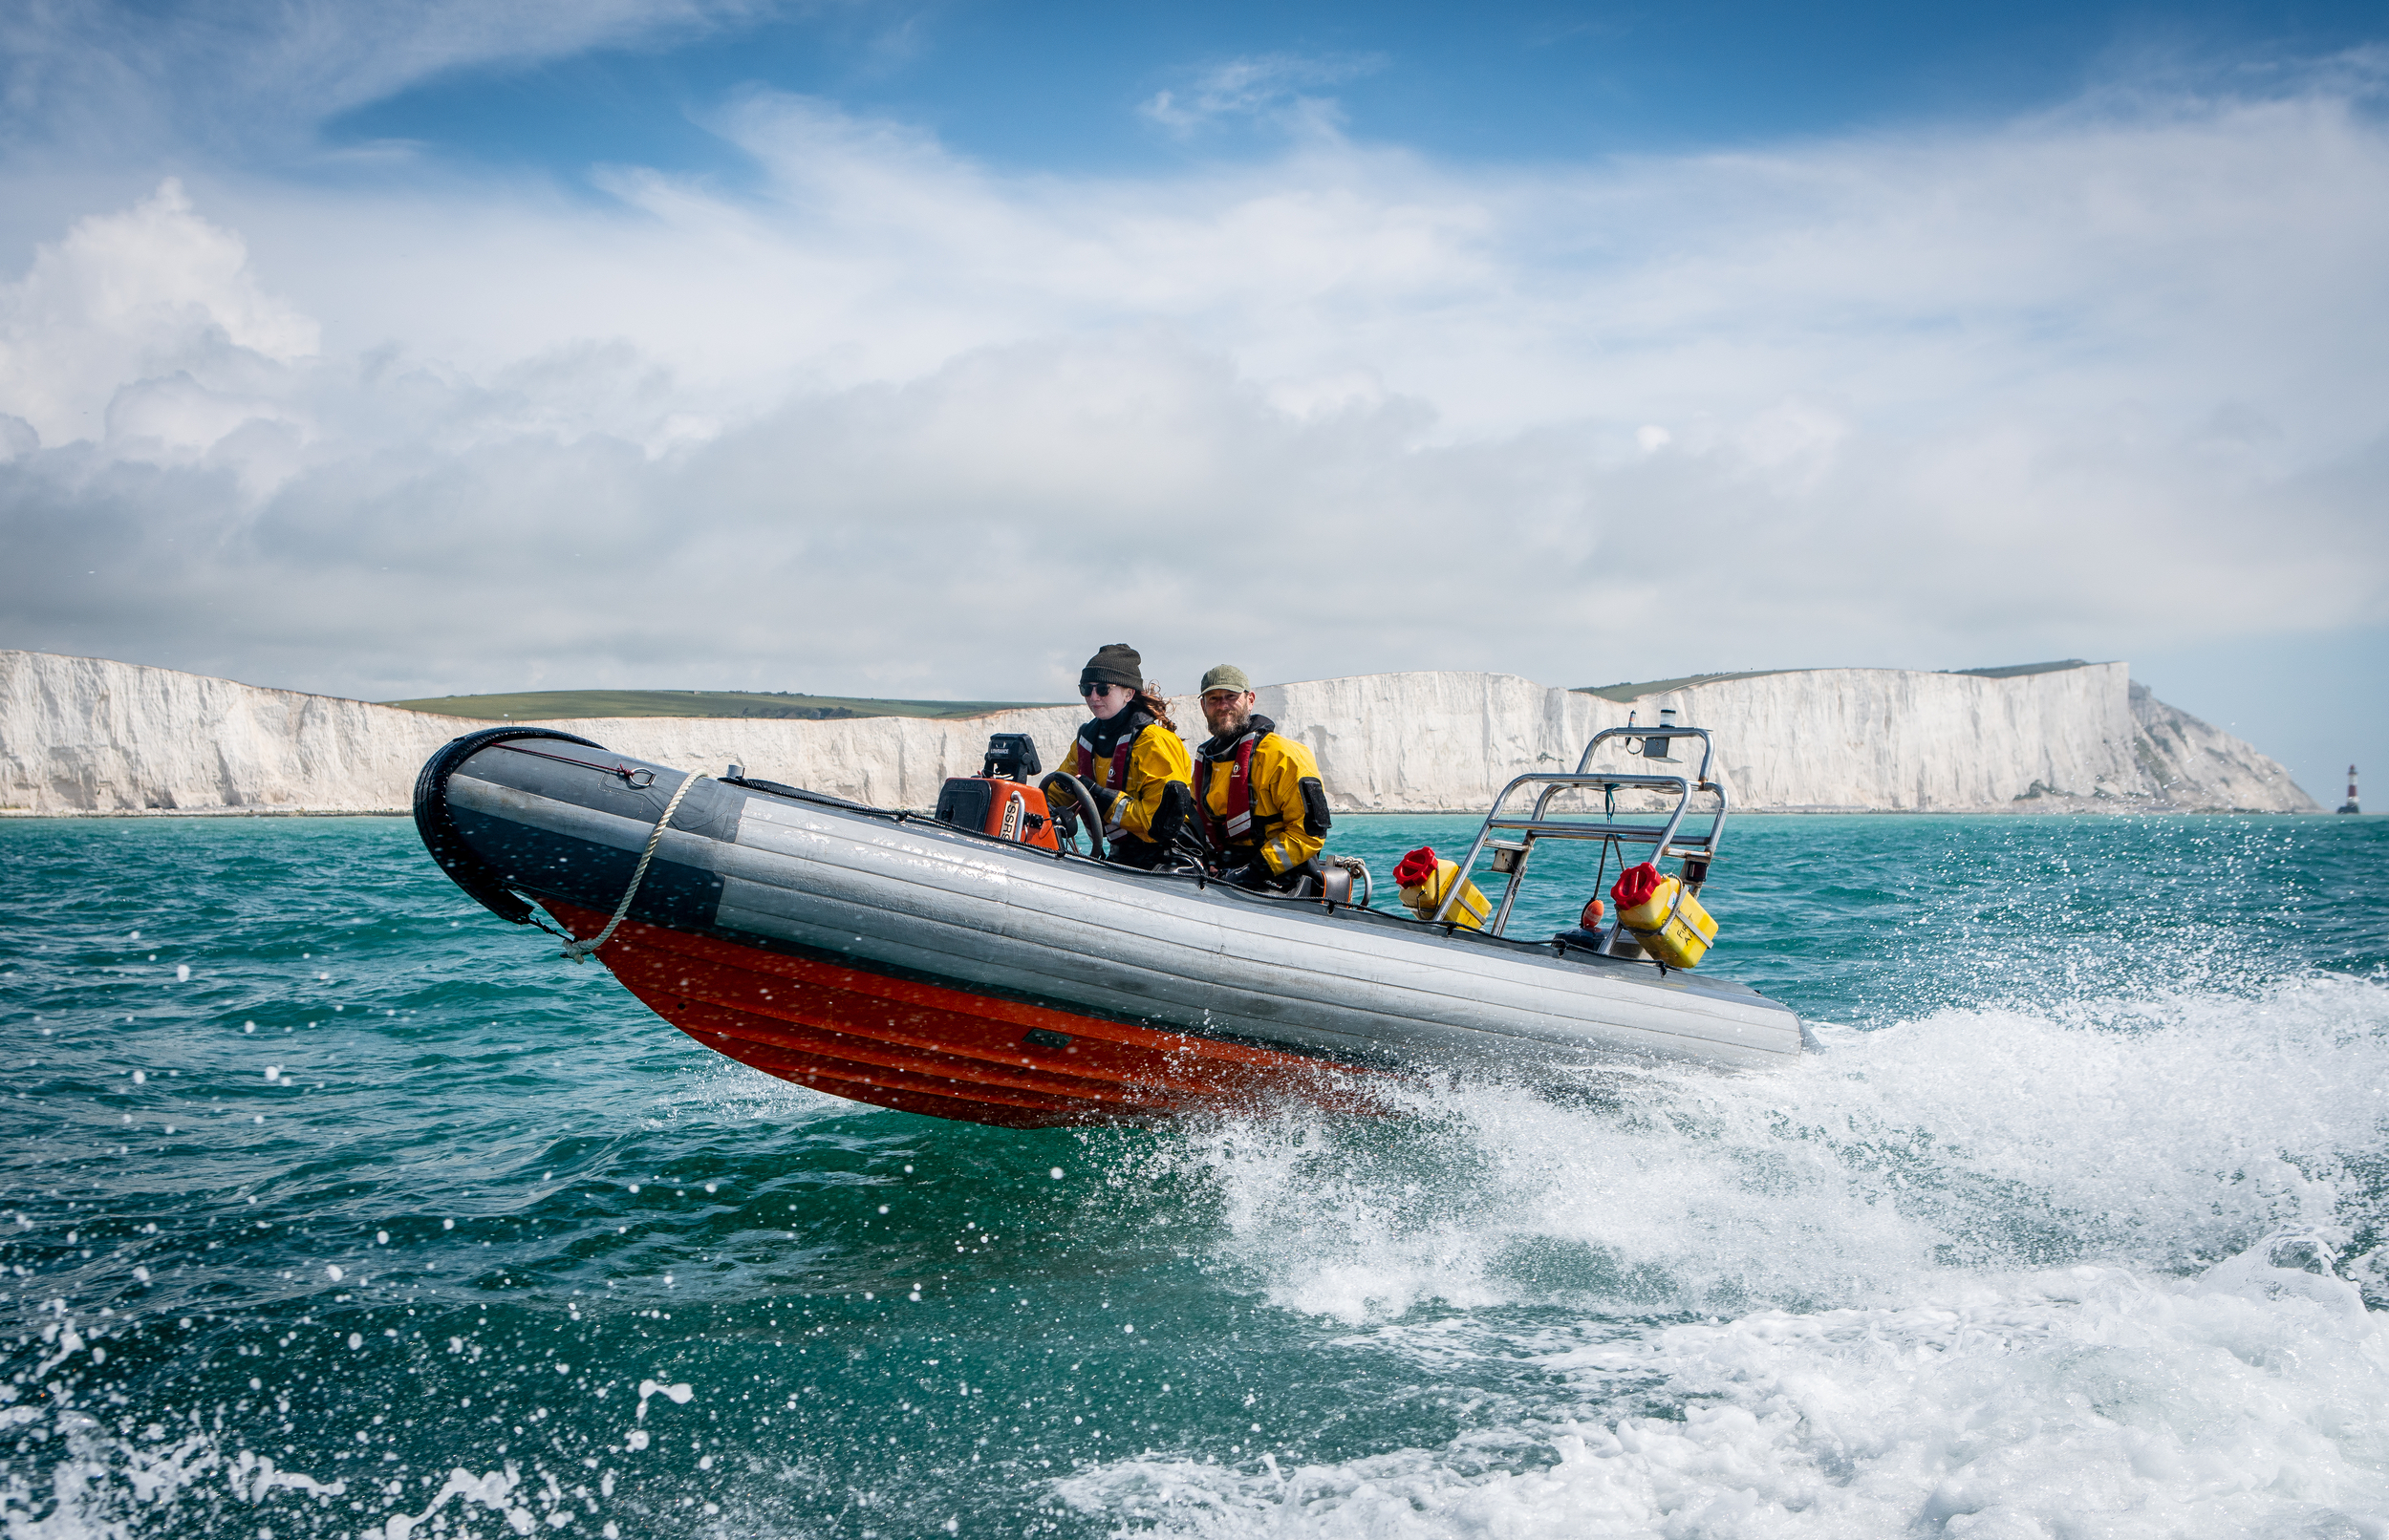 A rigid-hulled inflatable boat speeds through the water with activists in yellow survival suits on board. Tall white chalk cliffs are visible in the background.